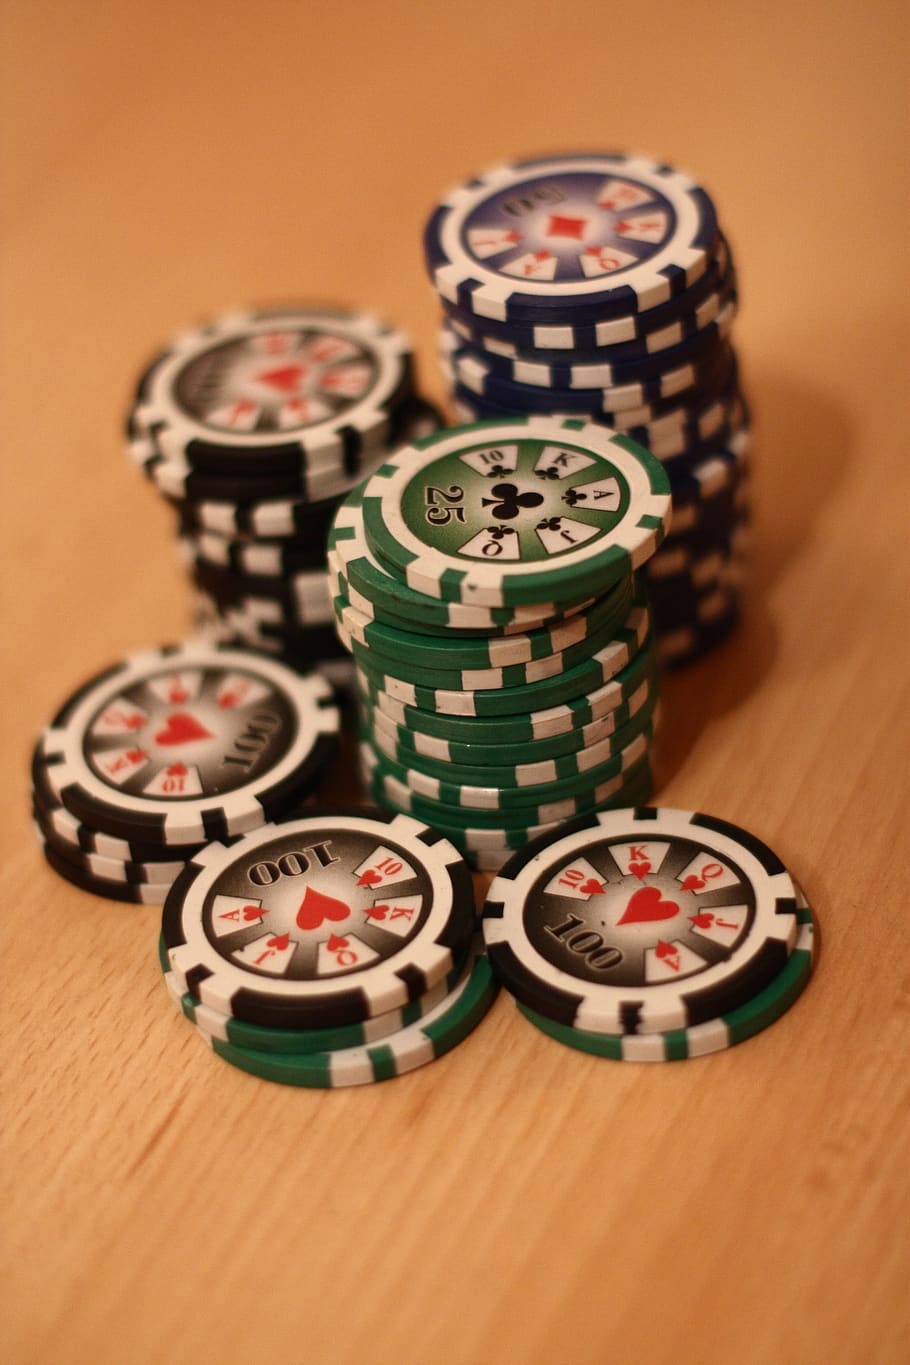 Selection of online casinos and some important tips